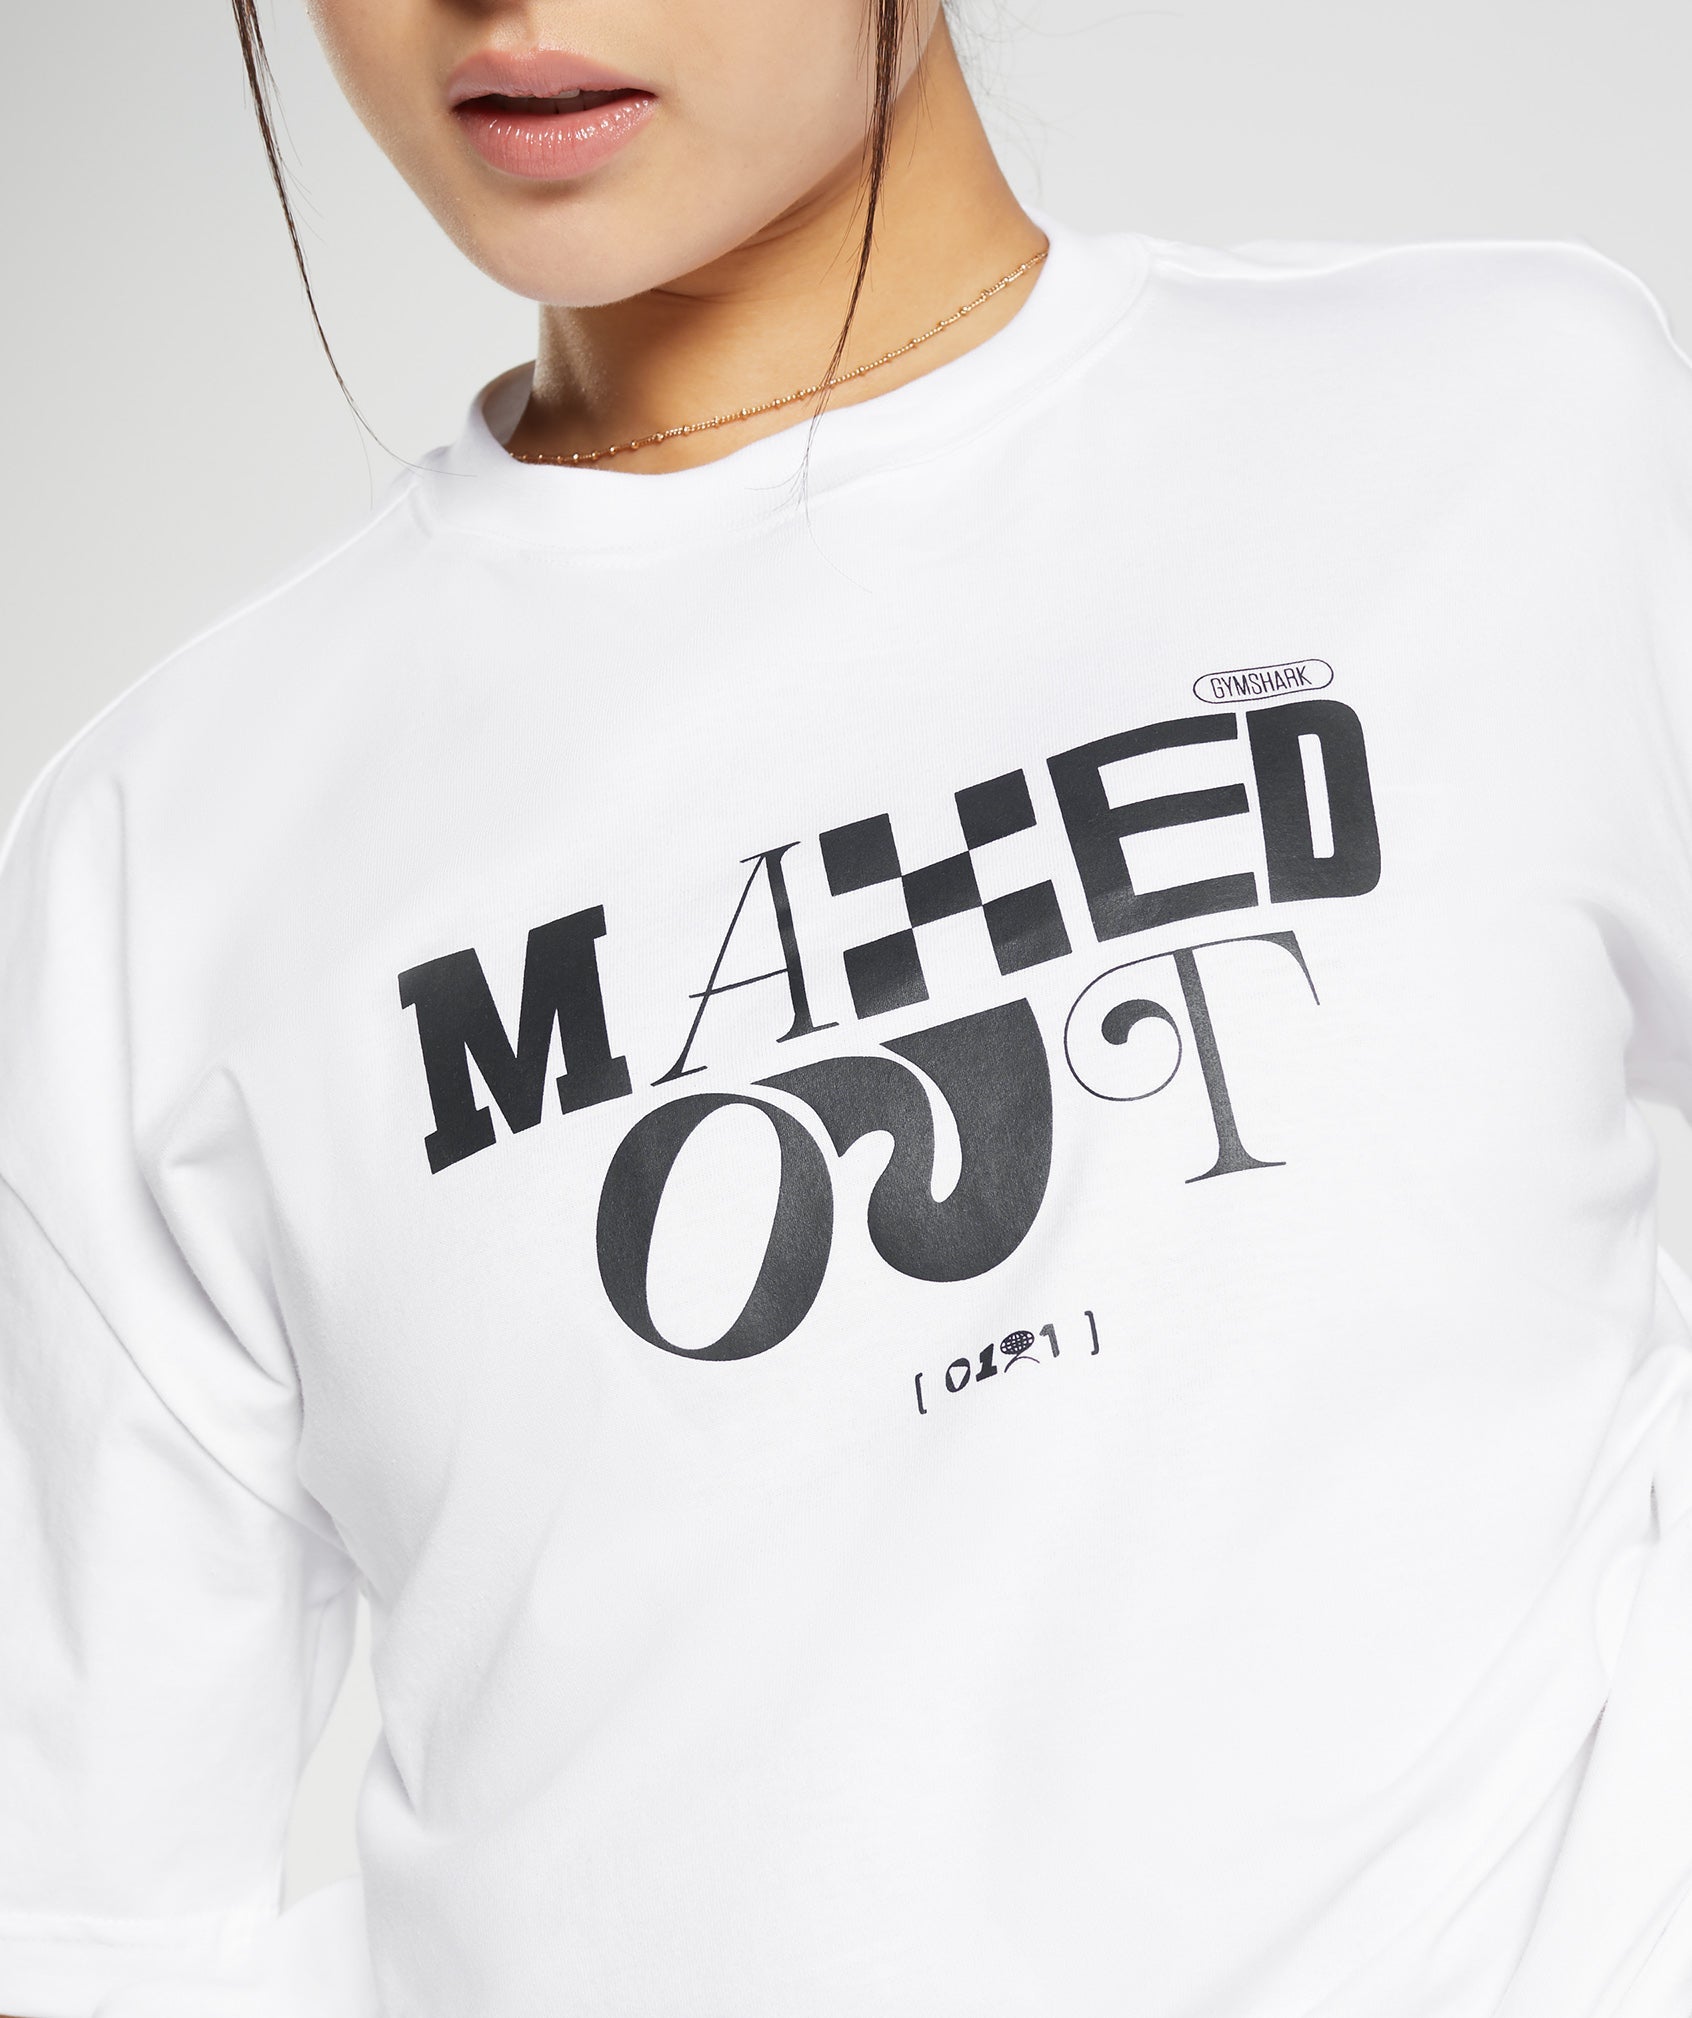 Maxed Out Oversized T-Shirt in White - view 5